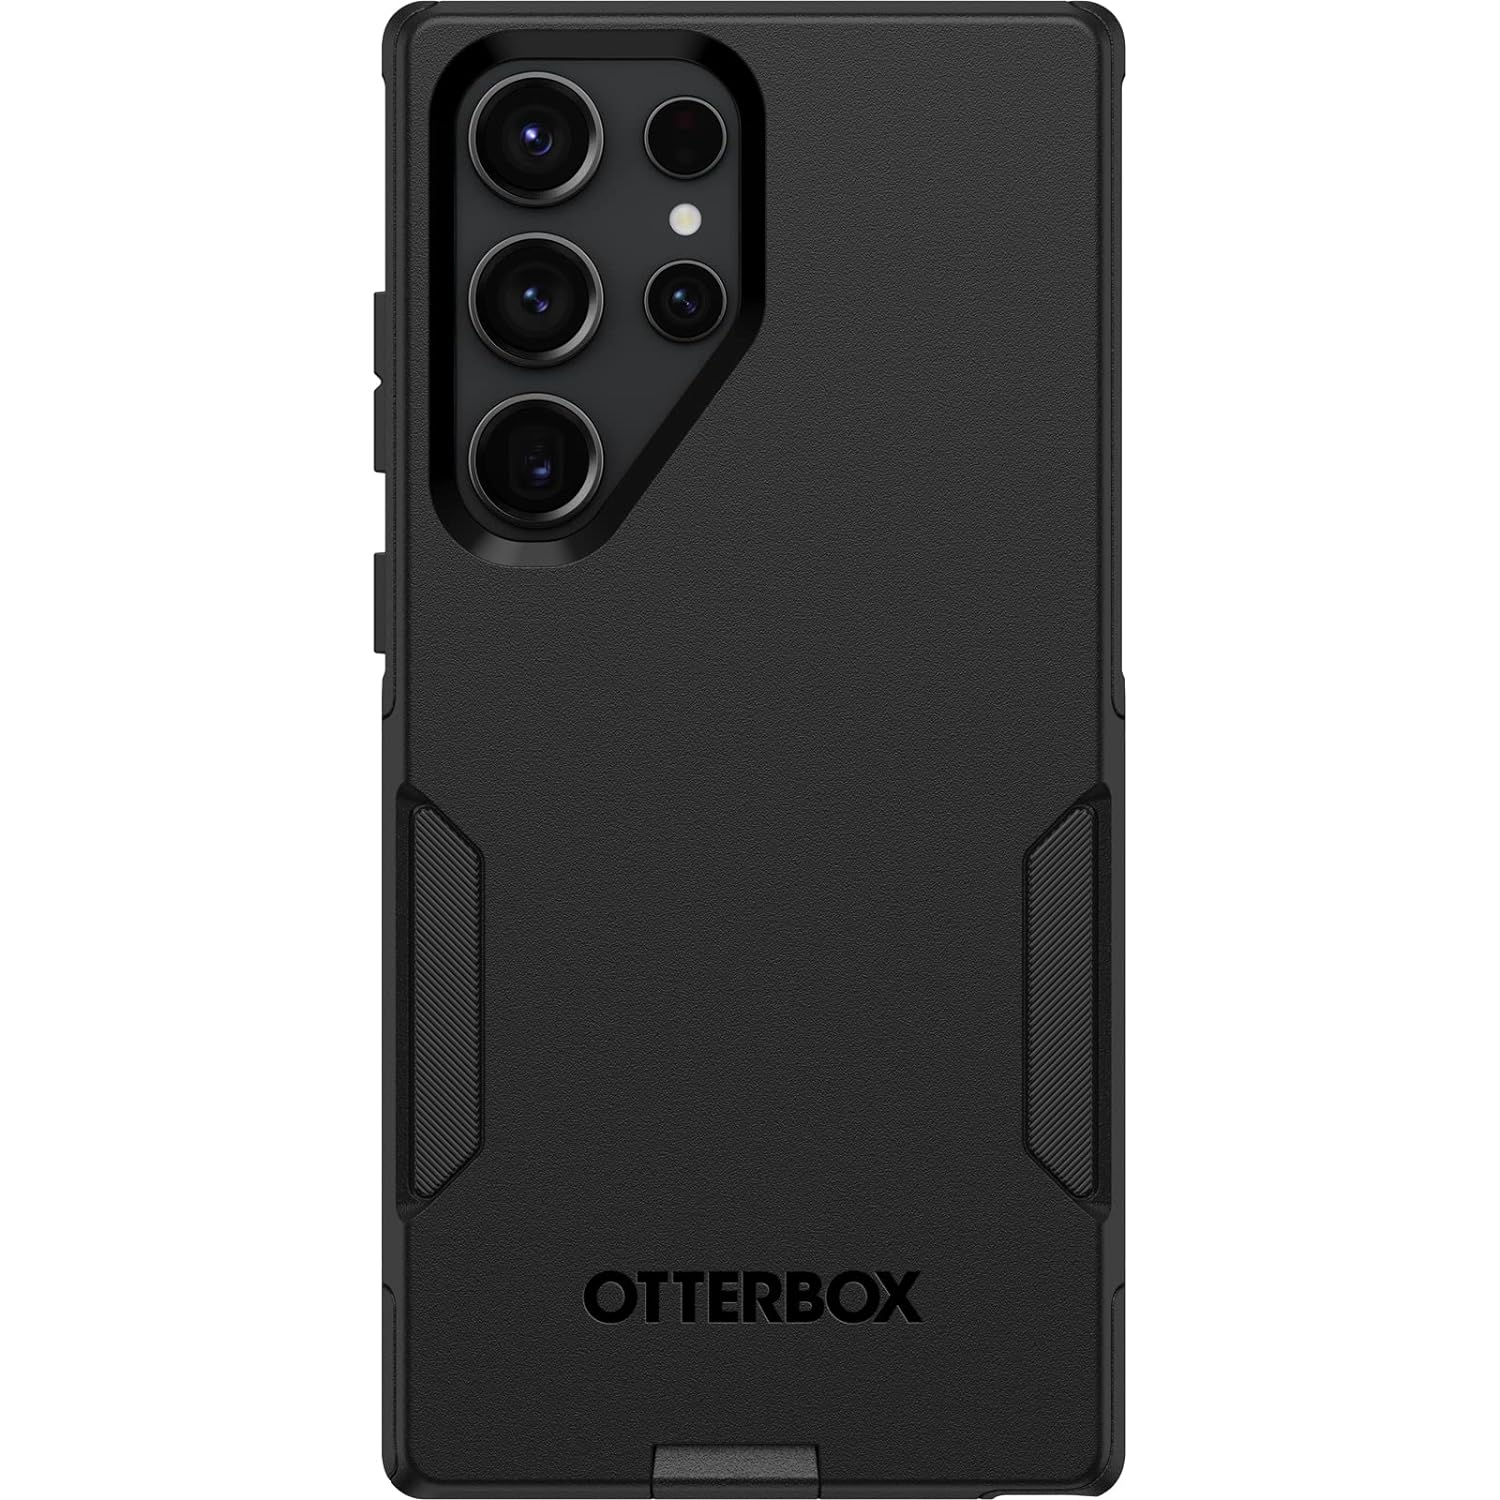 OtterBox Commuter Series case for SLICKSHOES - Single Unit Ships in Polybag, Ideal for Business Customers - Black